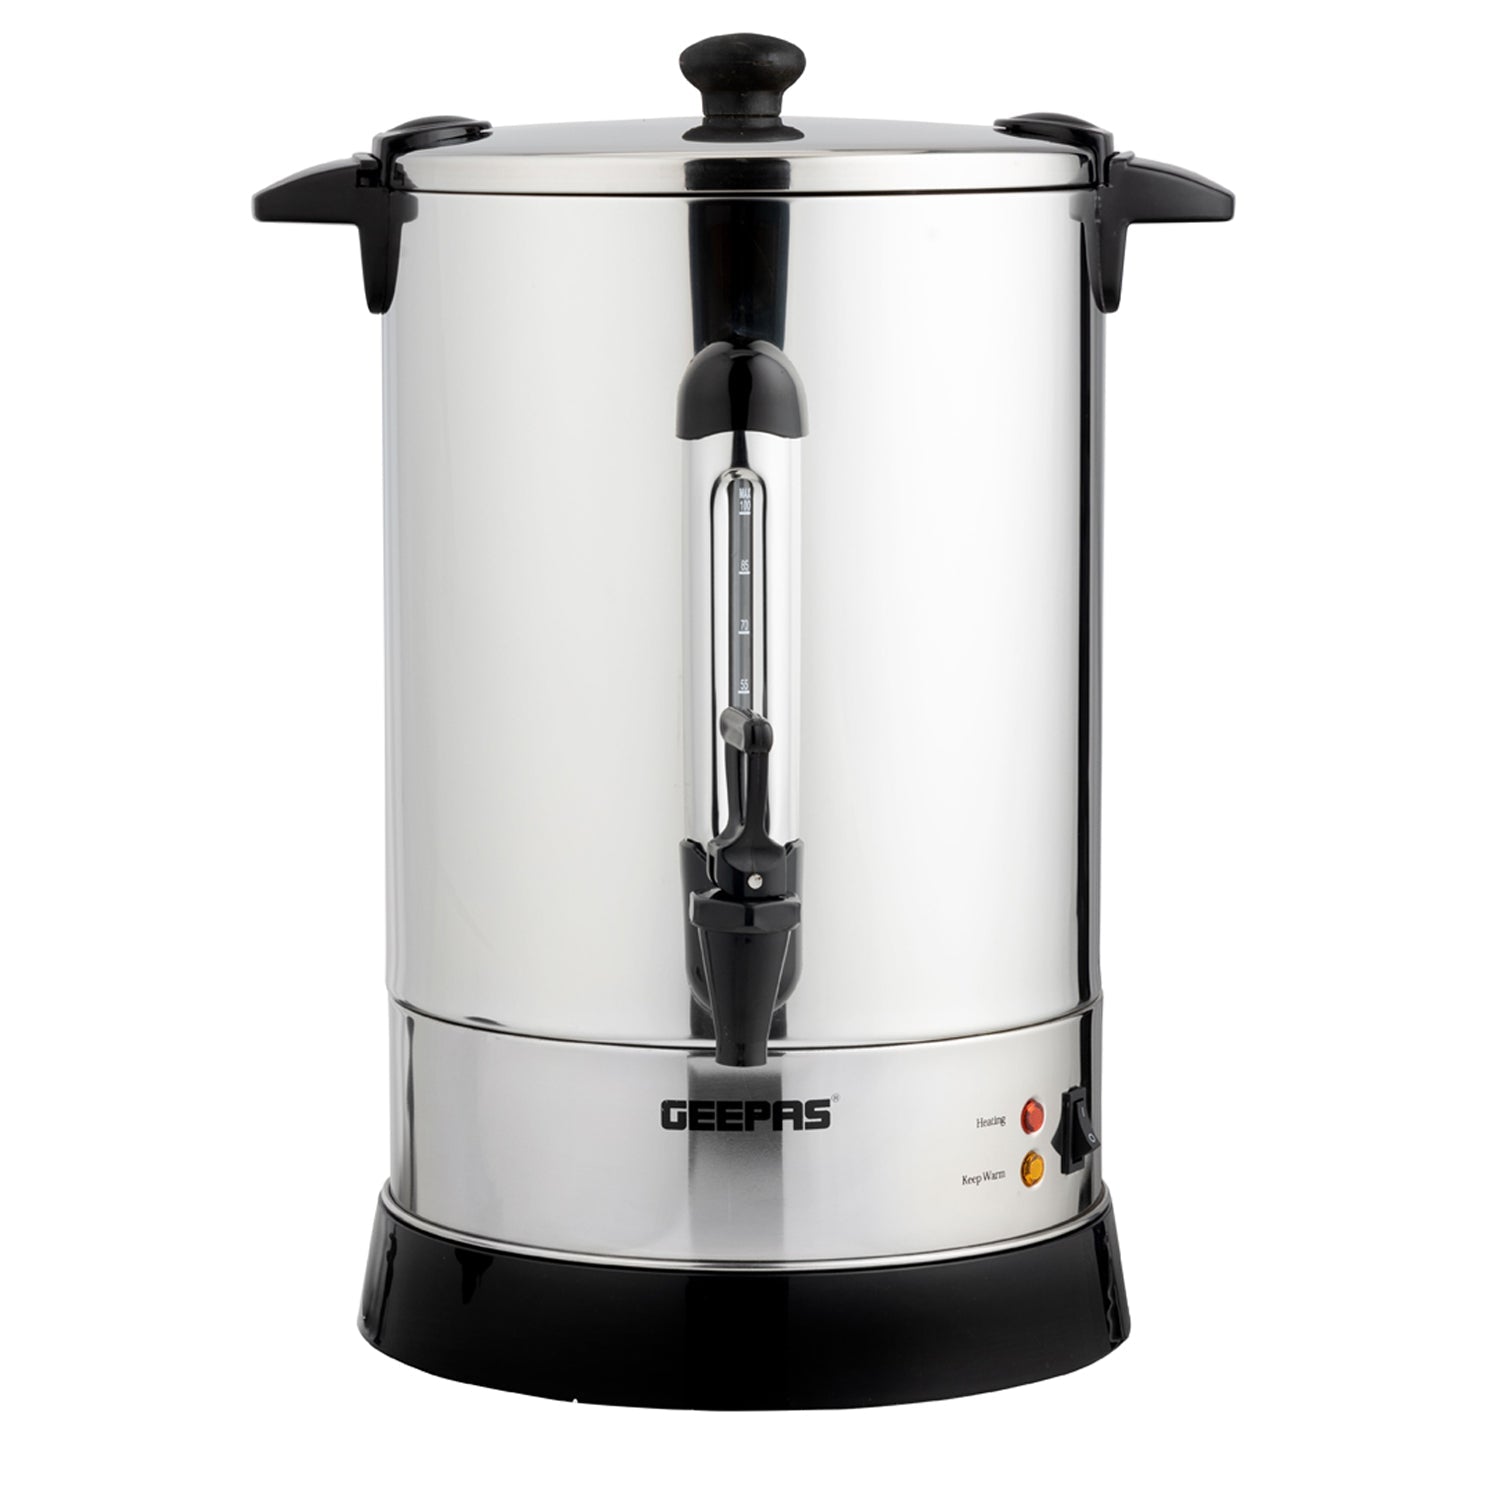 Electric 15L Catering Hot Water Boiler Commercial Coffee Tea Urn